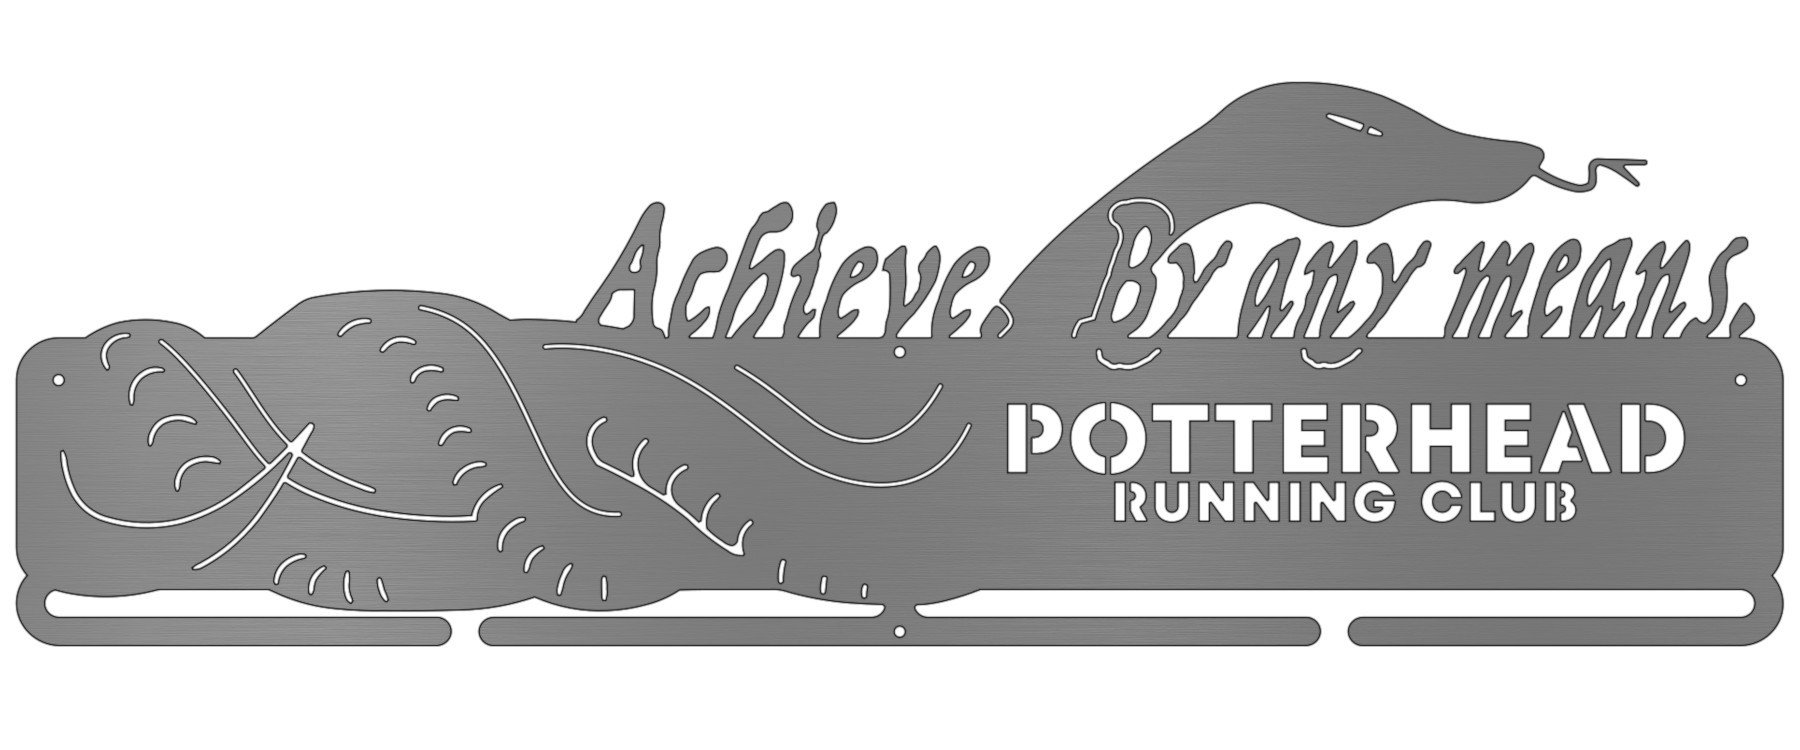 Potterhead Running Club - Achieve By Any Means (NO Perfect Prefect)